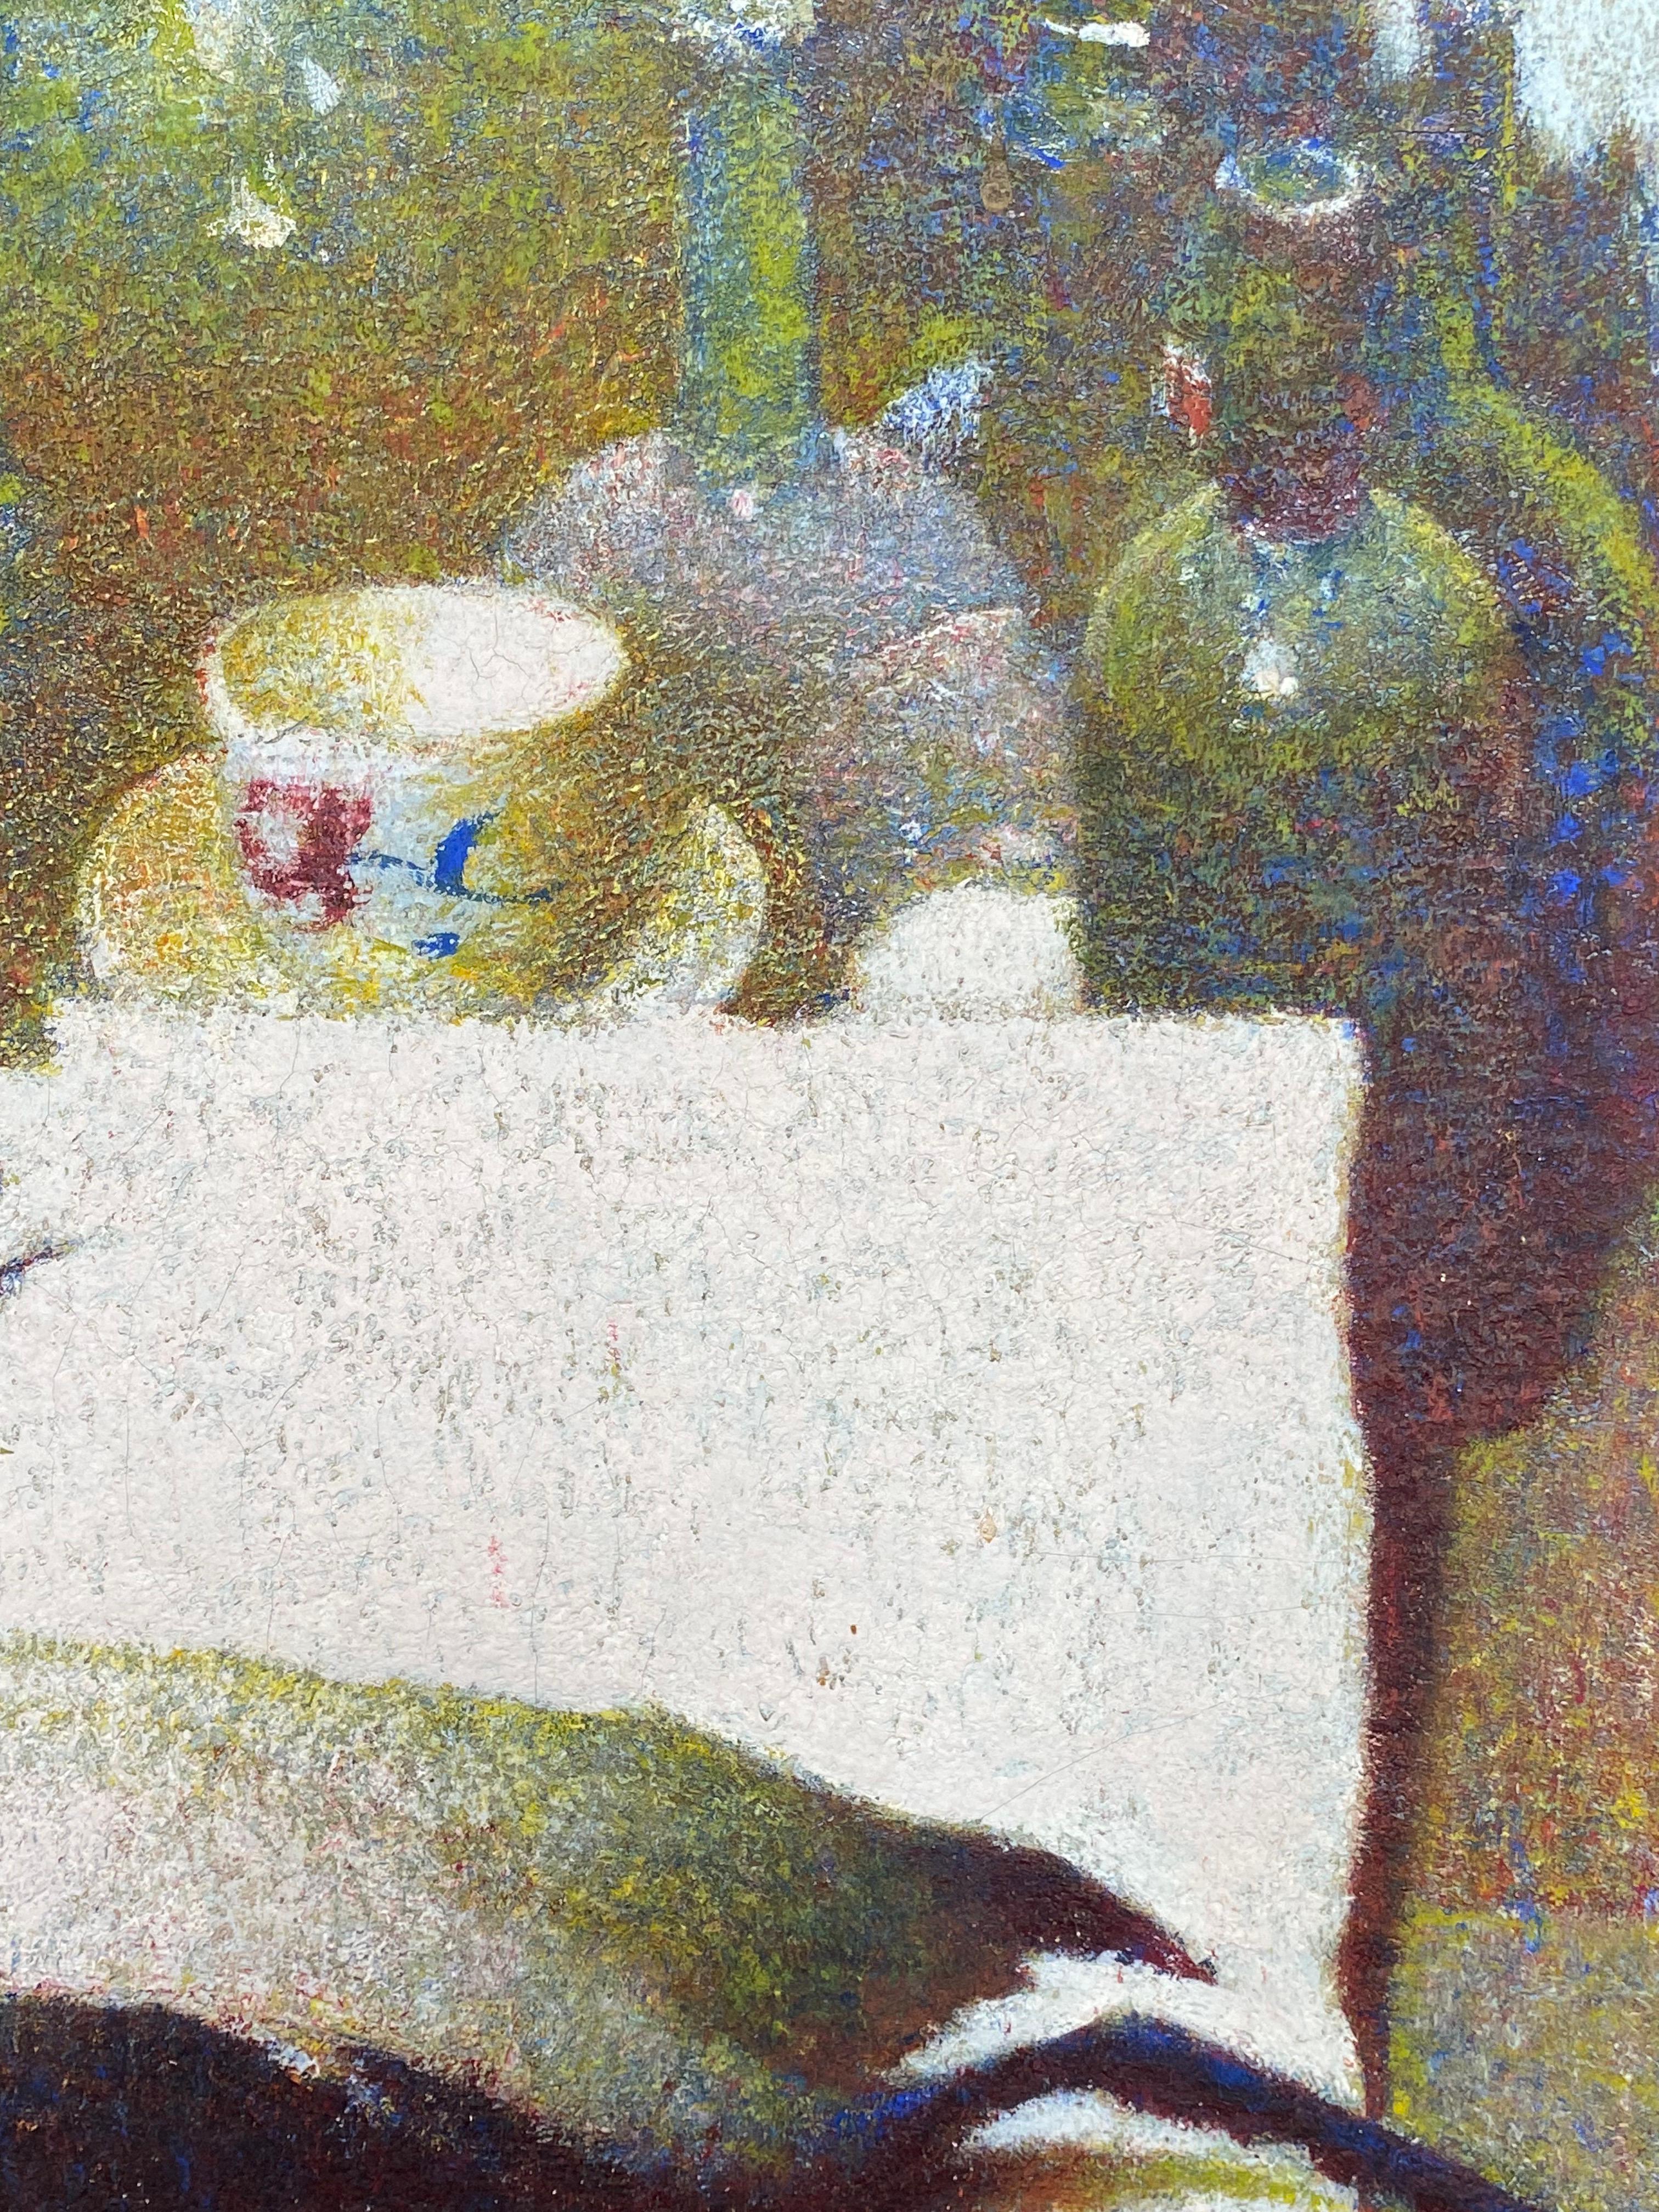 In Ducks in the Studio Schmitt reveals the influence of the Impressionists and the Pointillists by adopting their bright and pure colors. However, he chose not to paint with small dots but rather through small staple type dots and layers of color